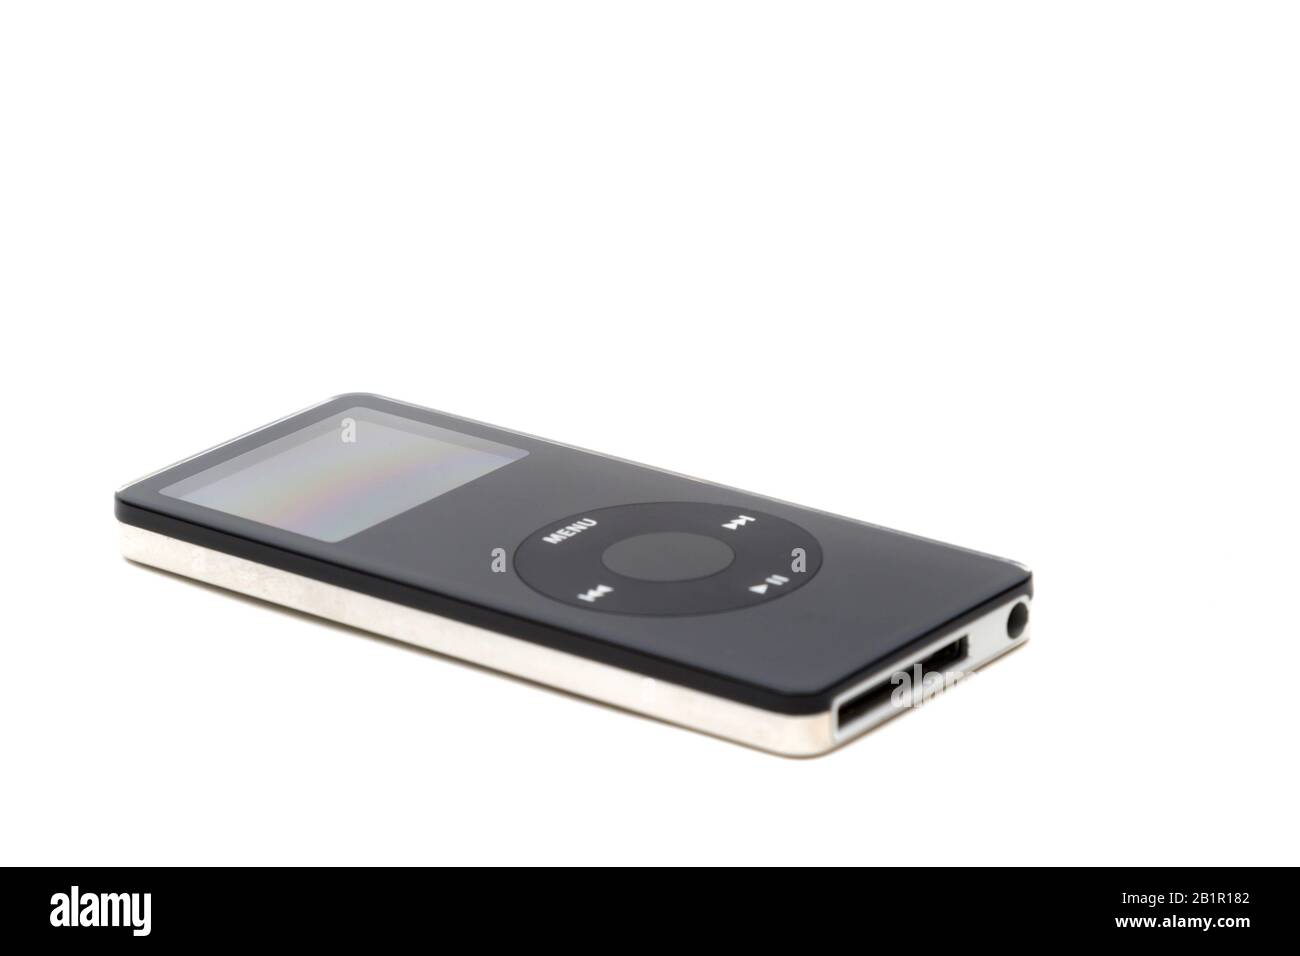 An Apple Ipod Nano isolated on a white backgrond Stock Photo